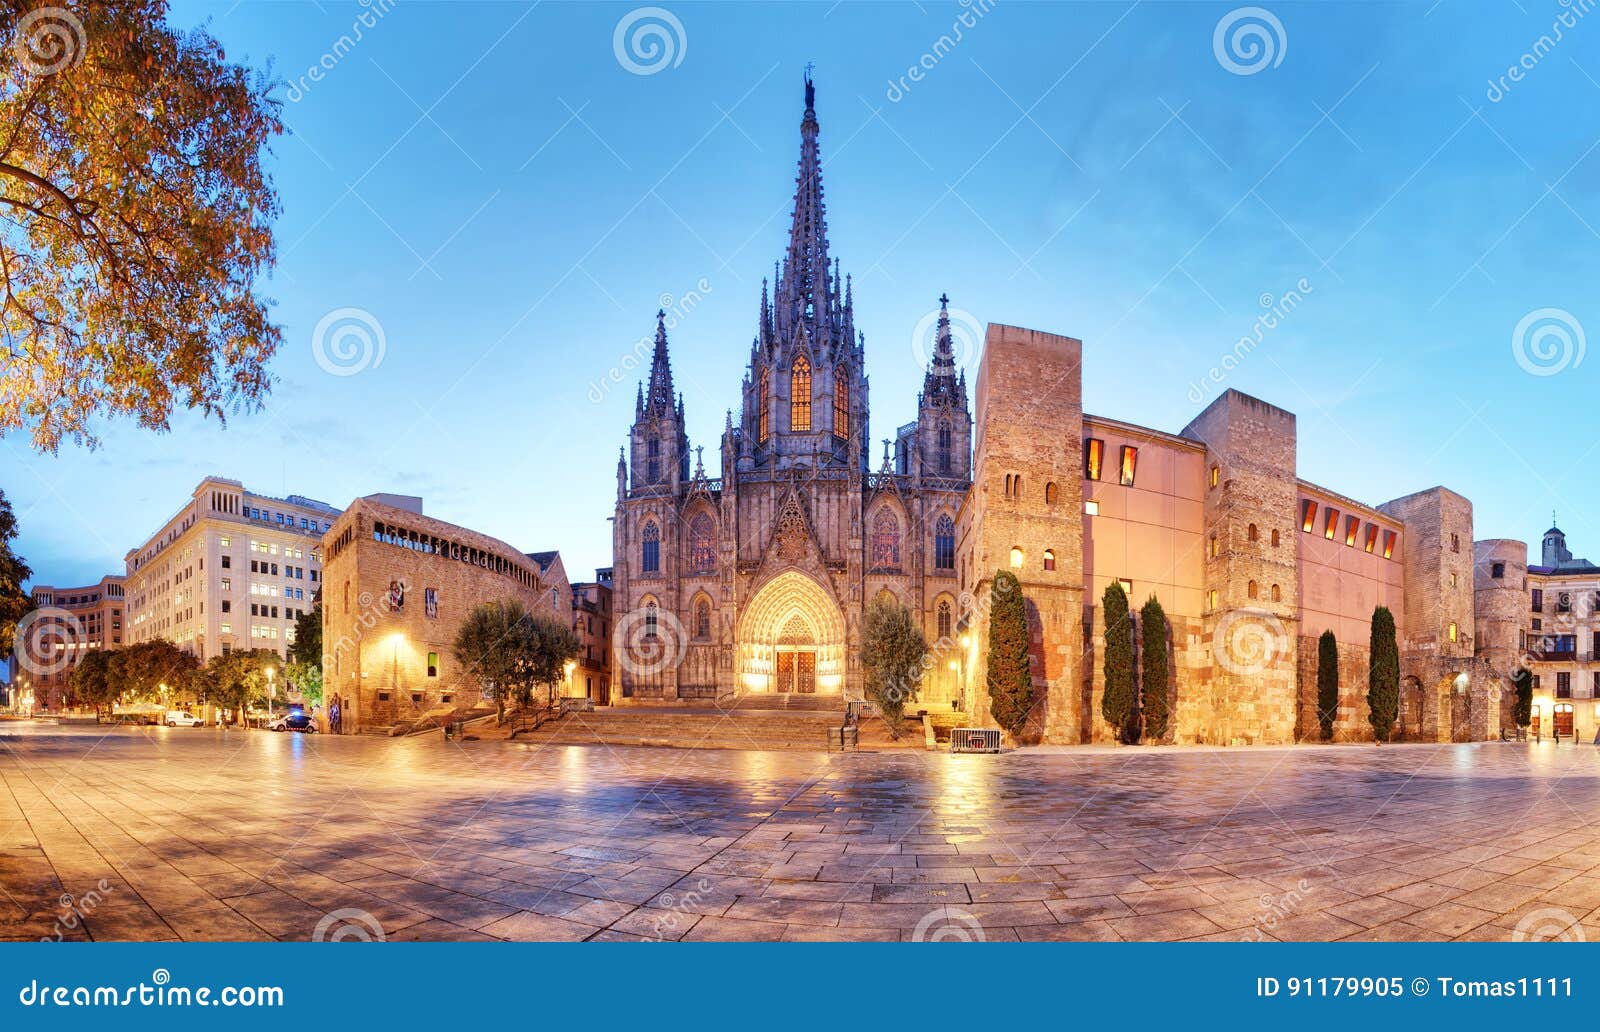 barcelona, panorama of cathedral, barri gothic quarter